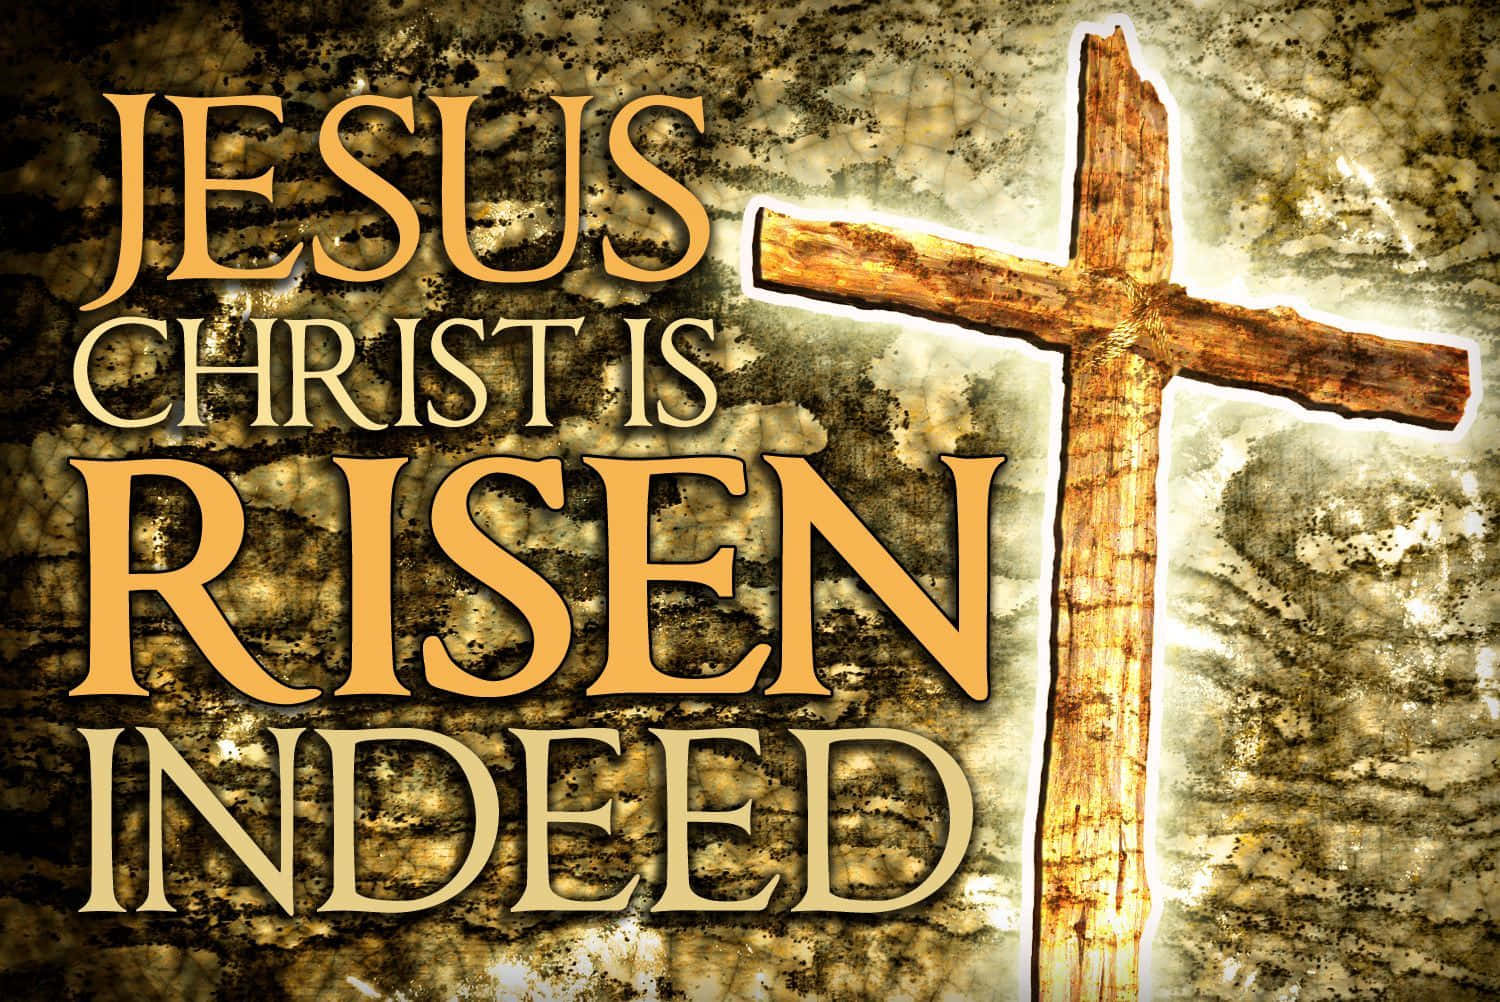 "Christ Is Risen and We Rejoice in His Resurrection!" Wallpaper